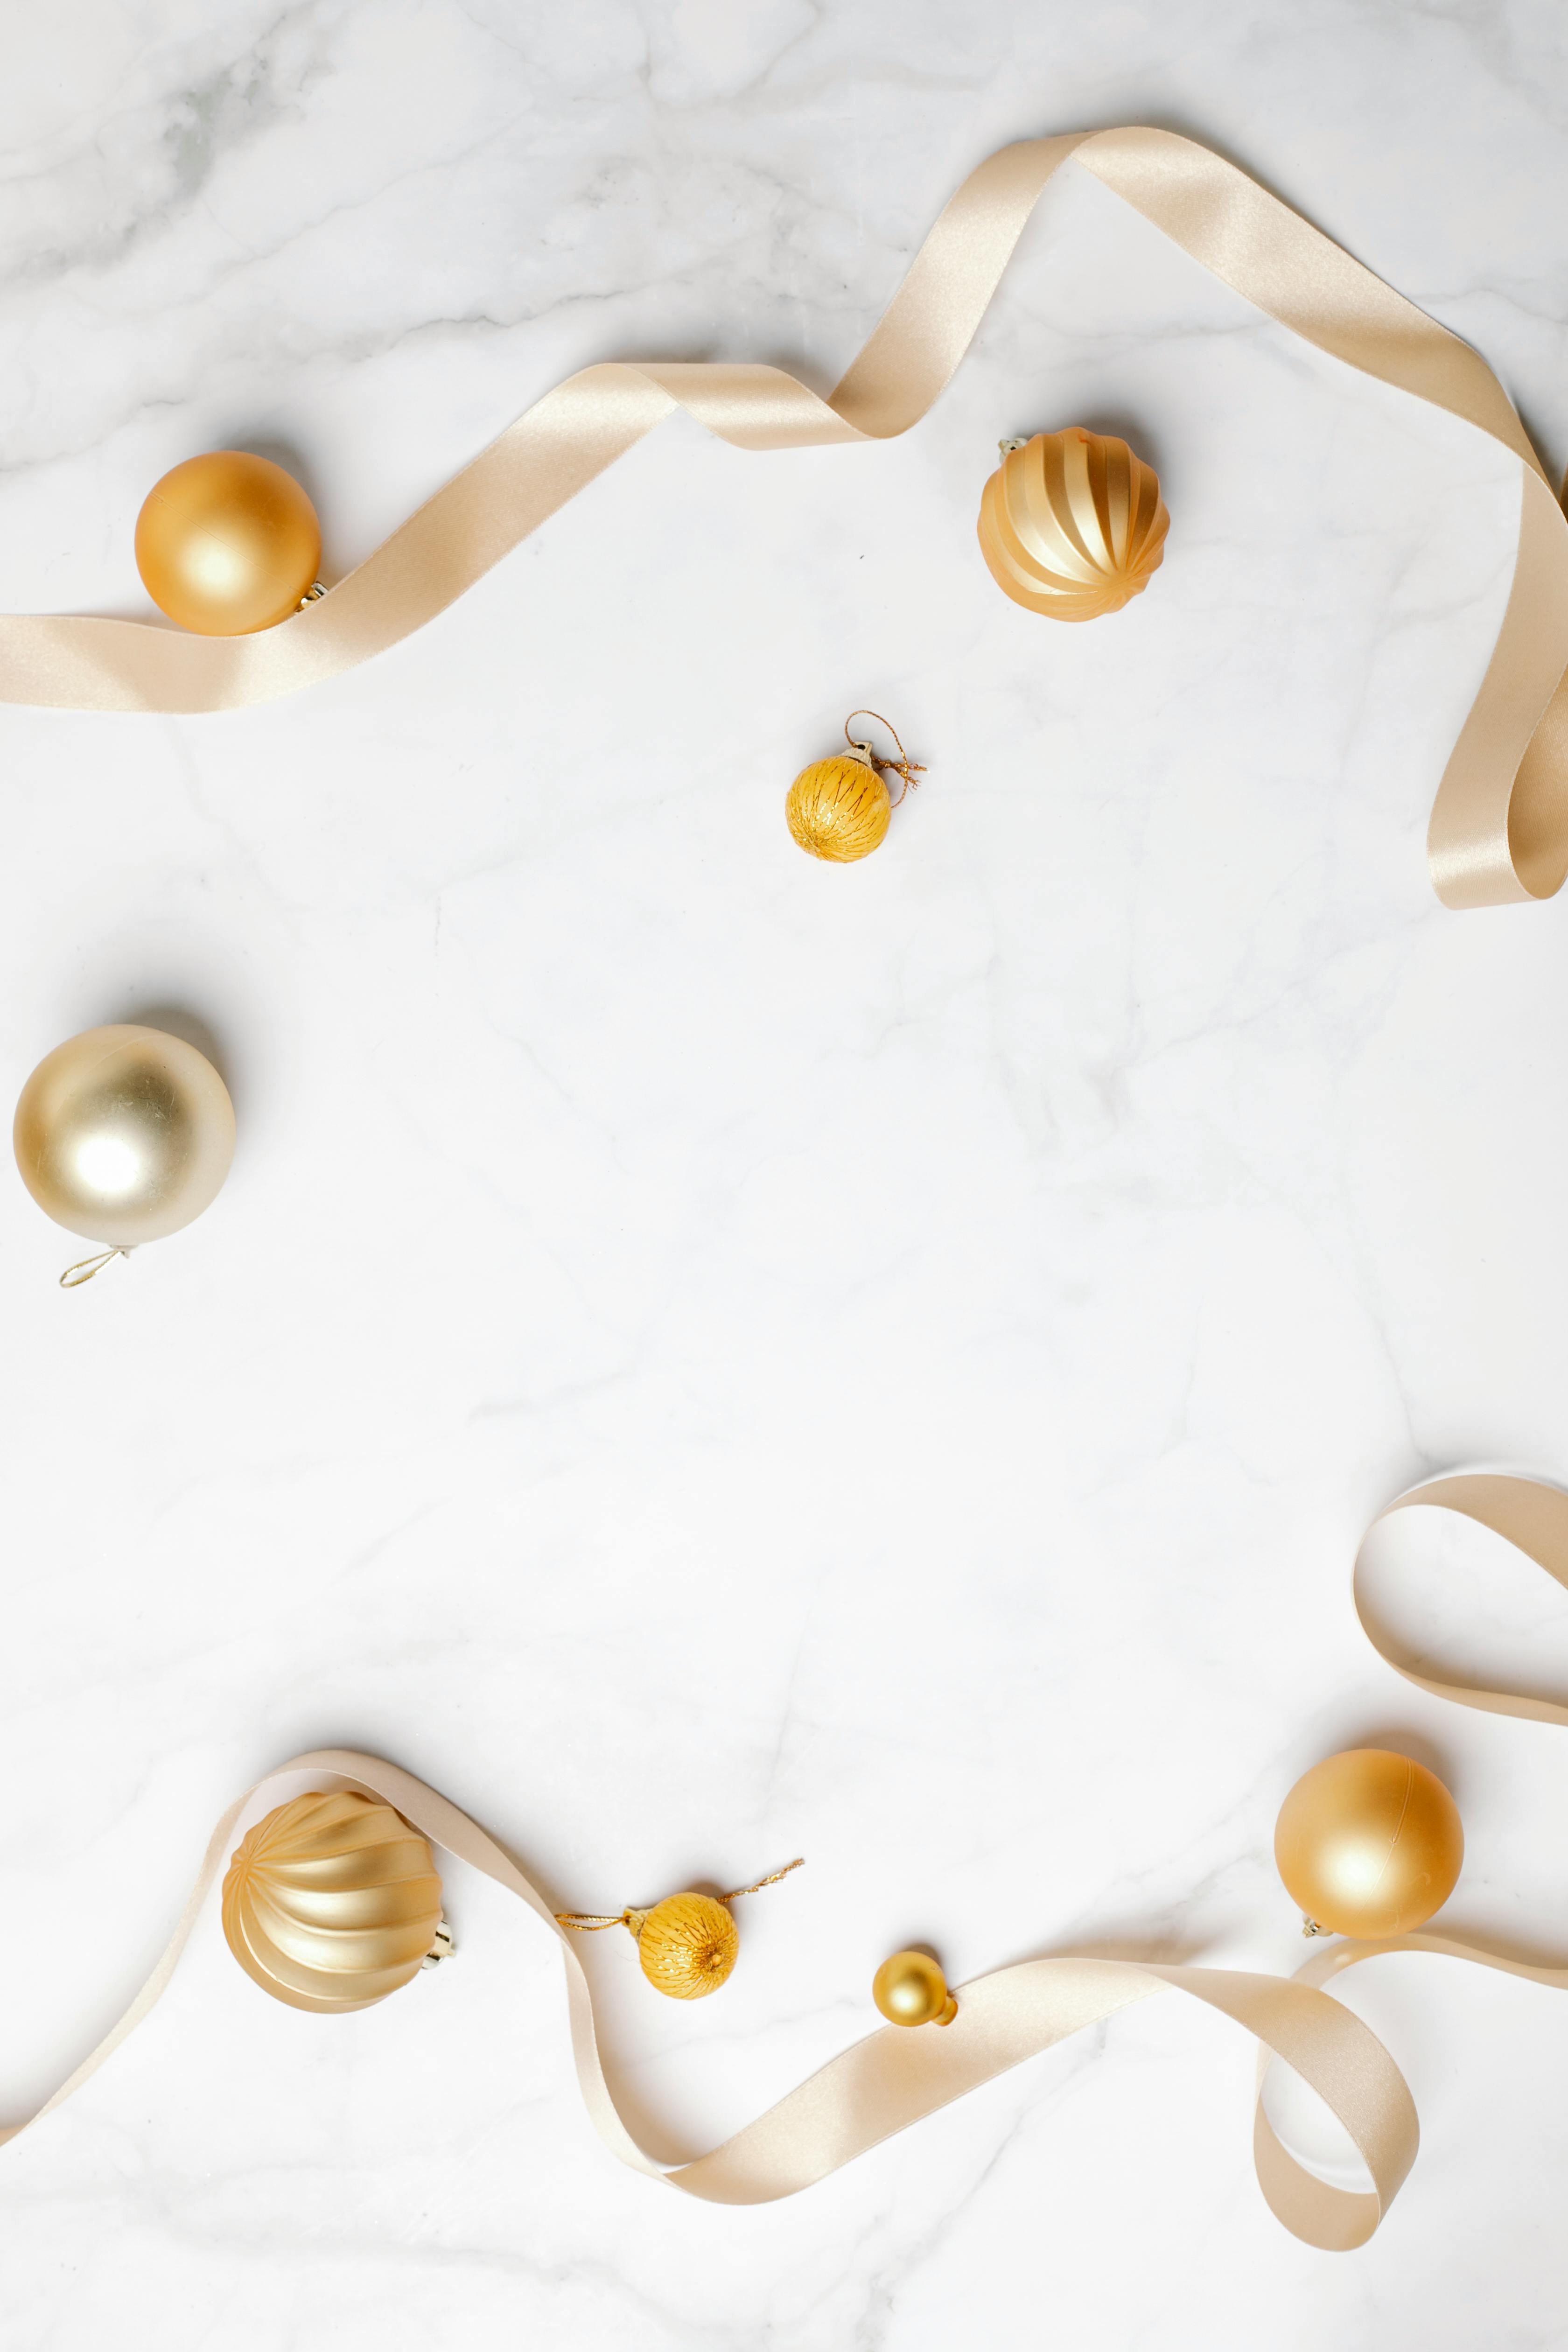 decorative golden baubles and ribbons placed on marble table